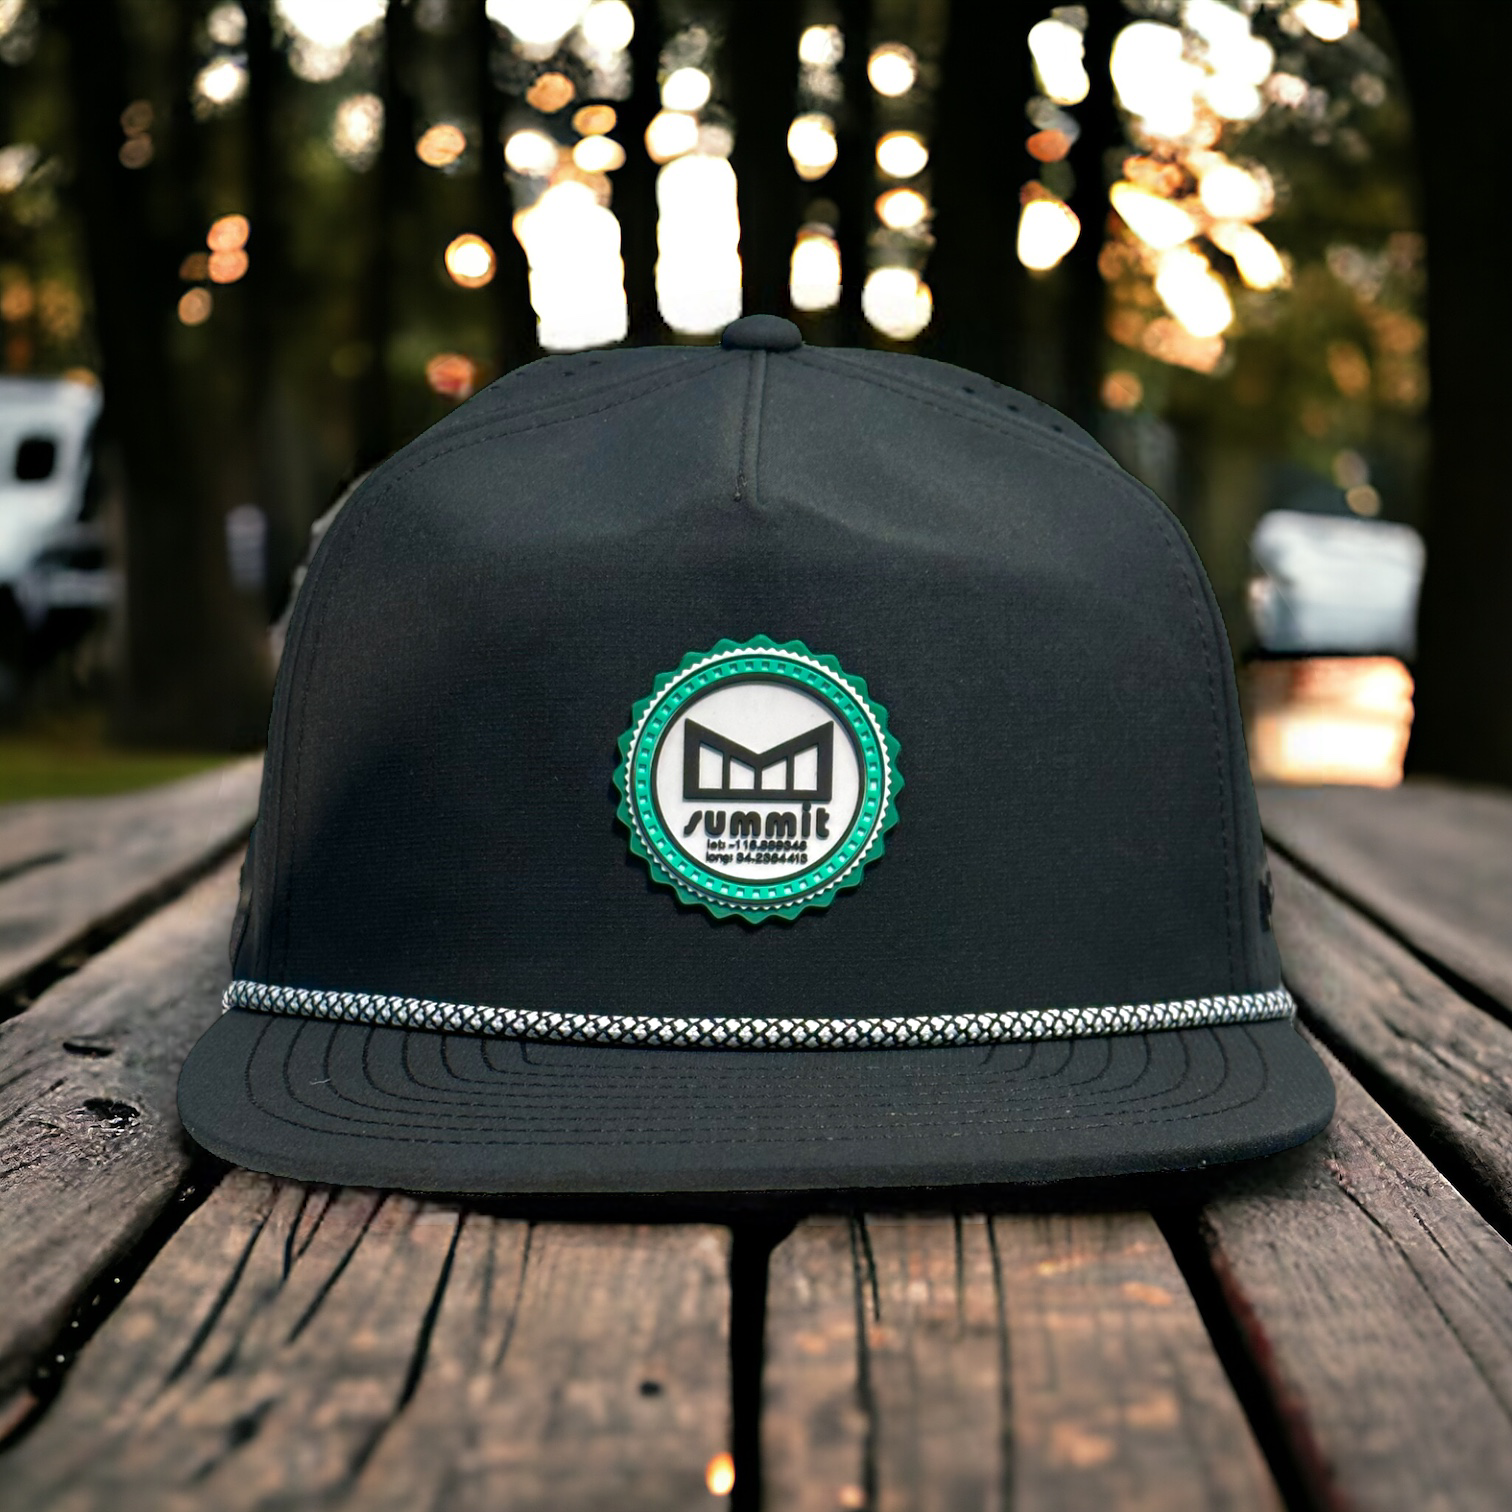 Melin x Snow Summit black snapback hat with logo and rope on brim